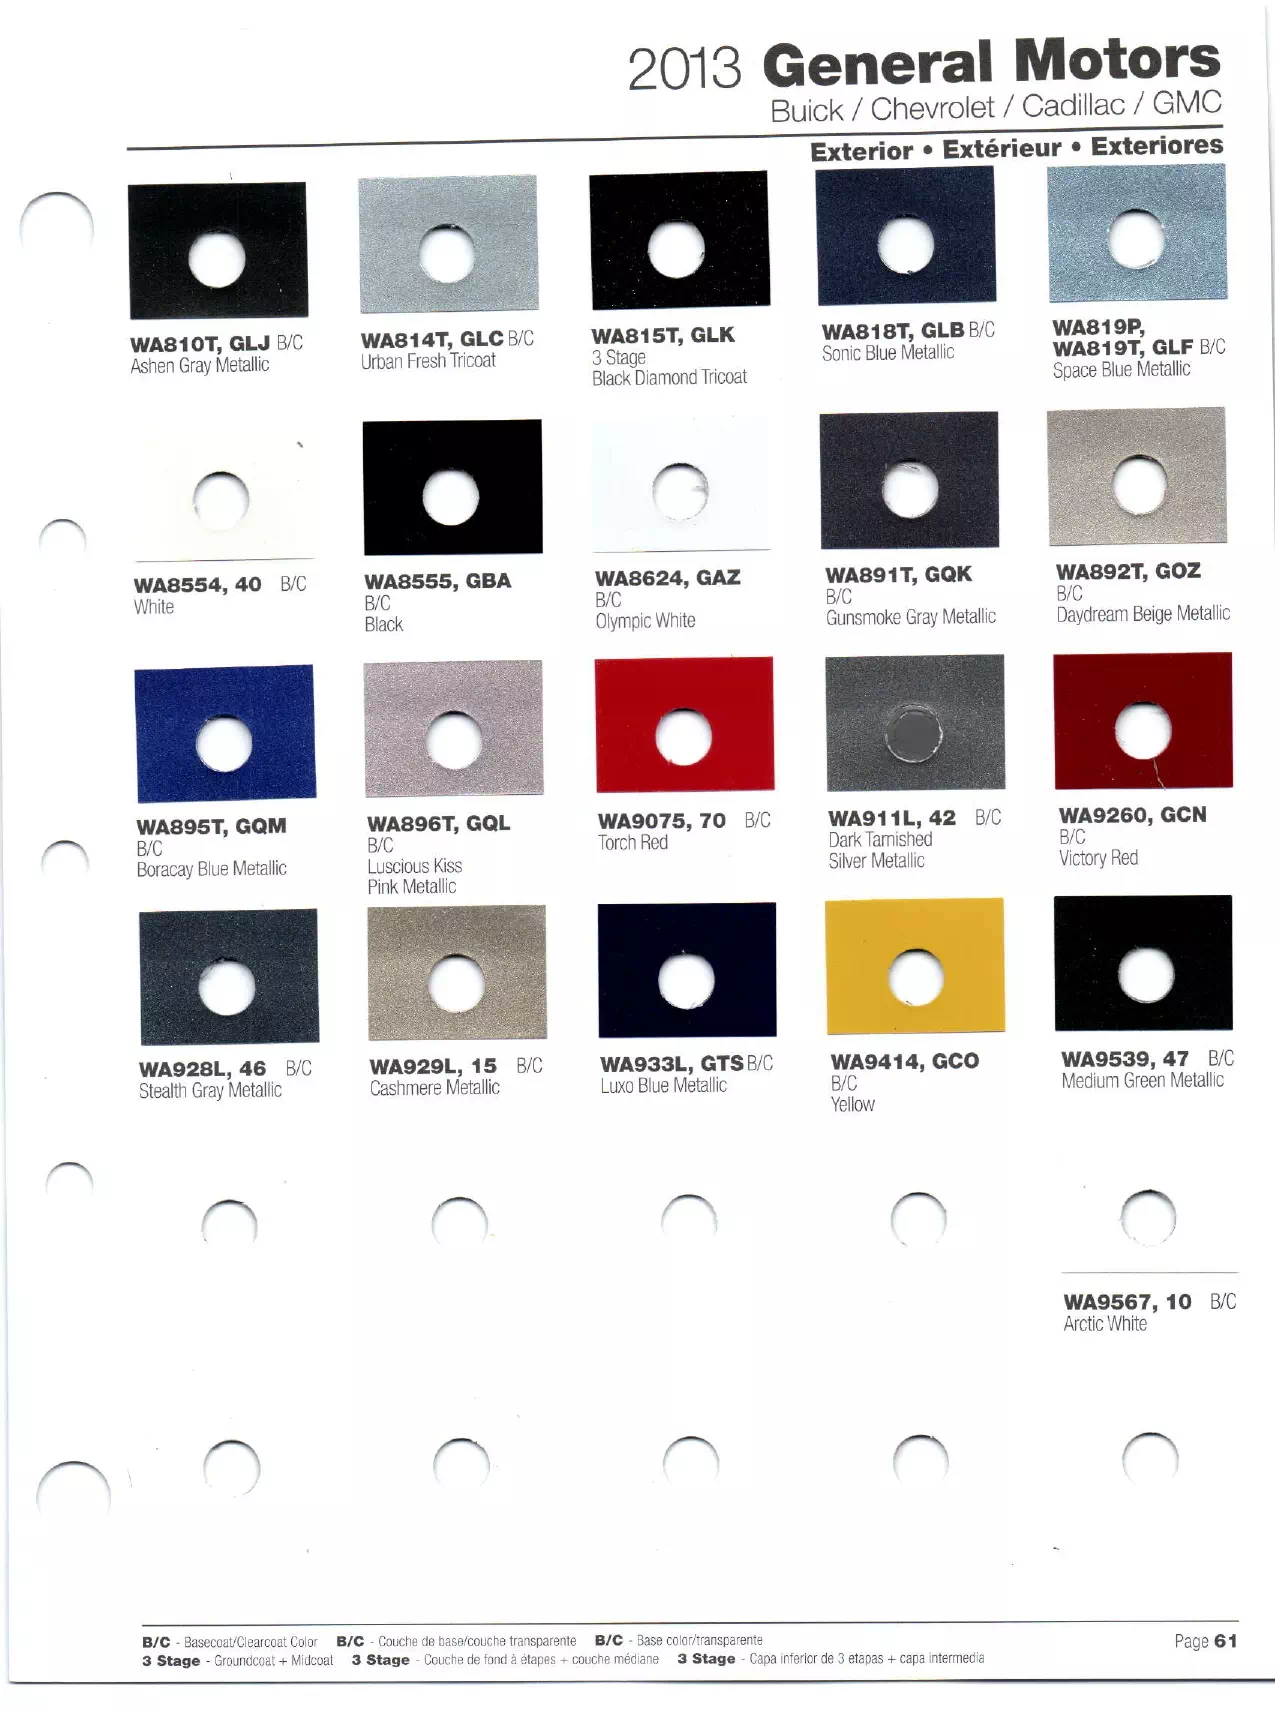 Paint codes and their Color Example used on all General Motor Vehicles